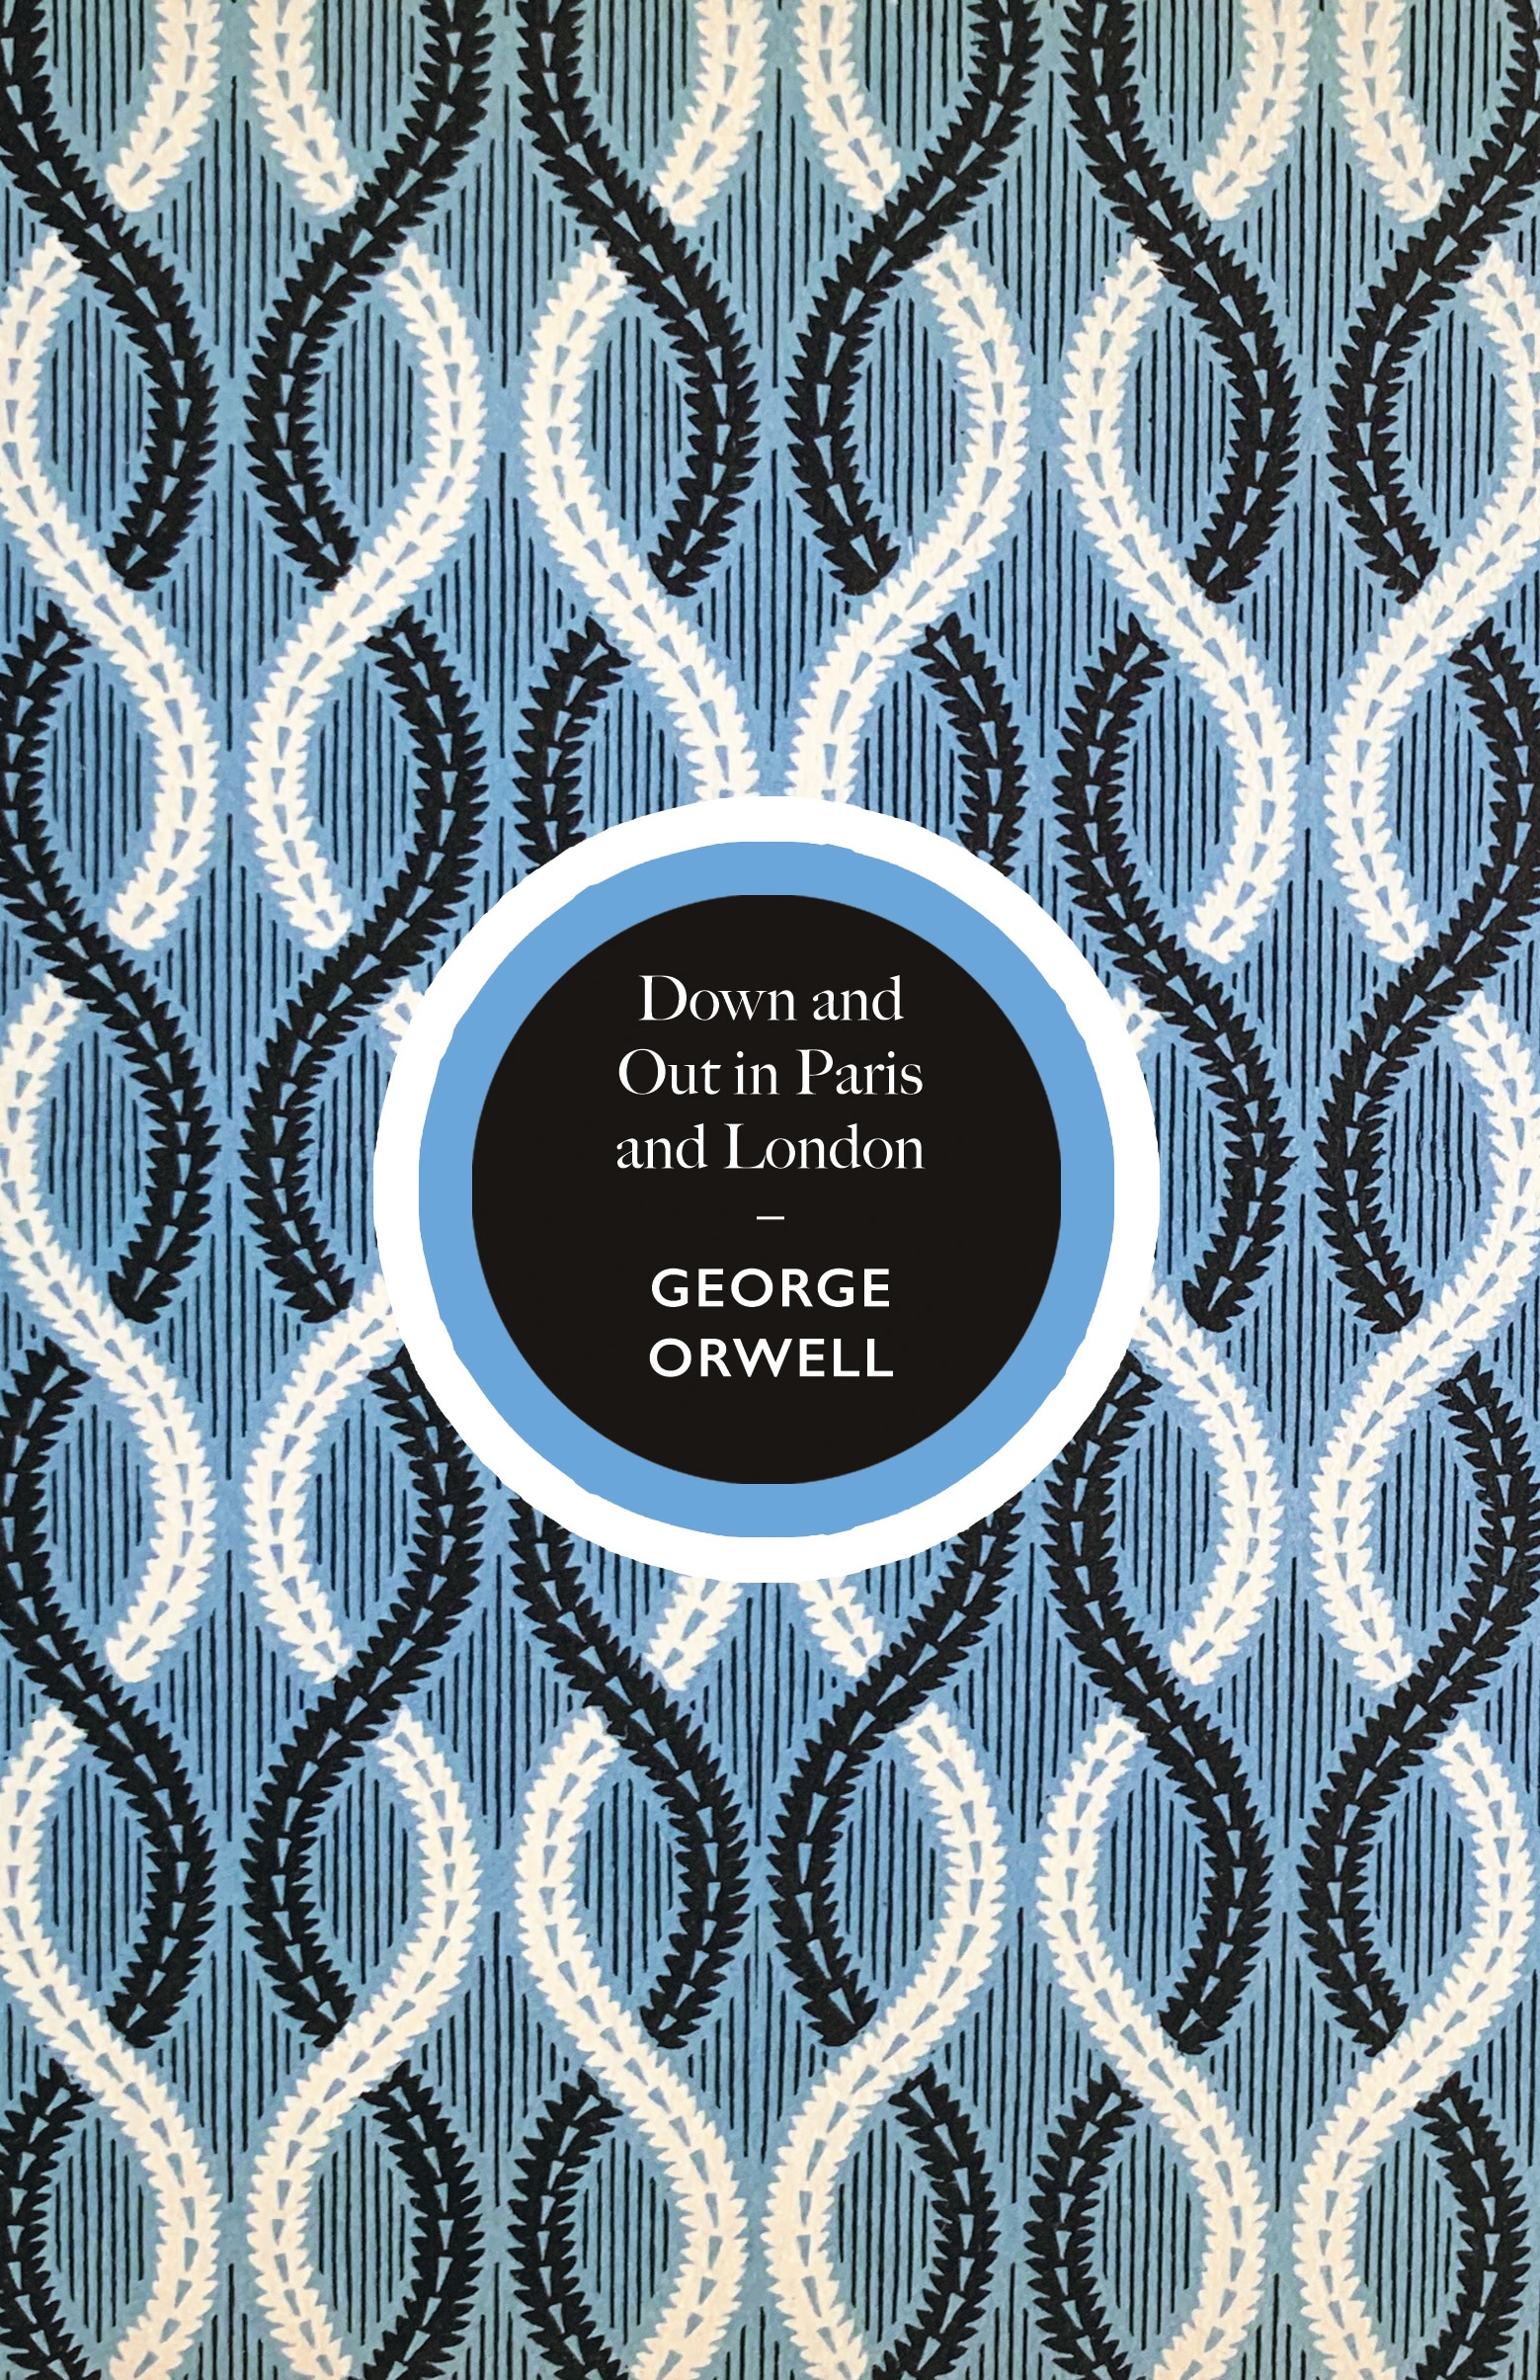 Book “Down and Out in Paris and London” by George Orwell, Kerry Hudson — August 13, 2020